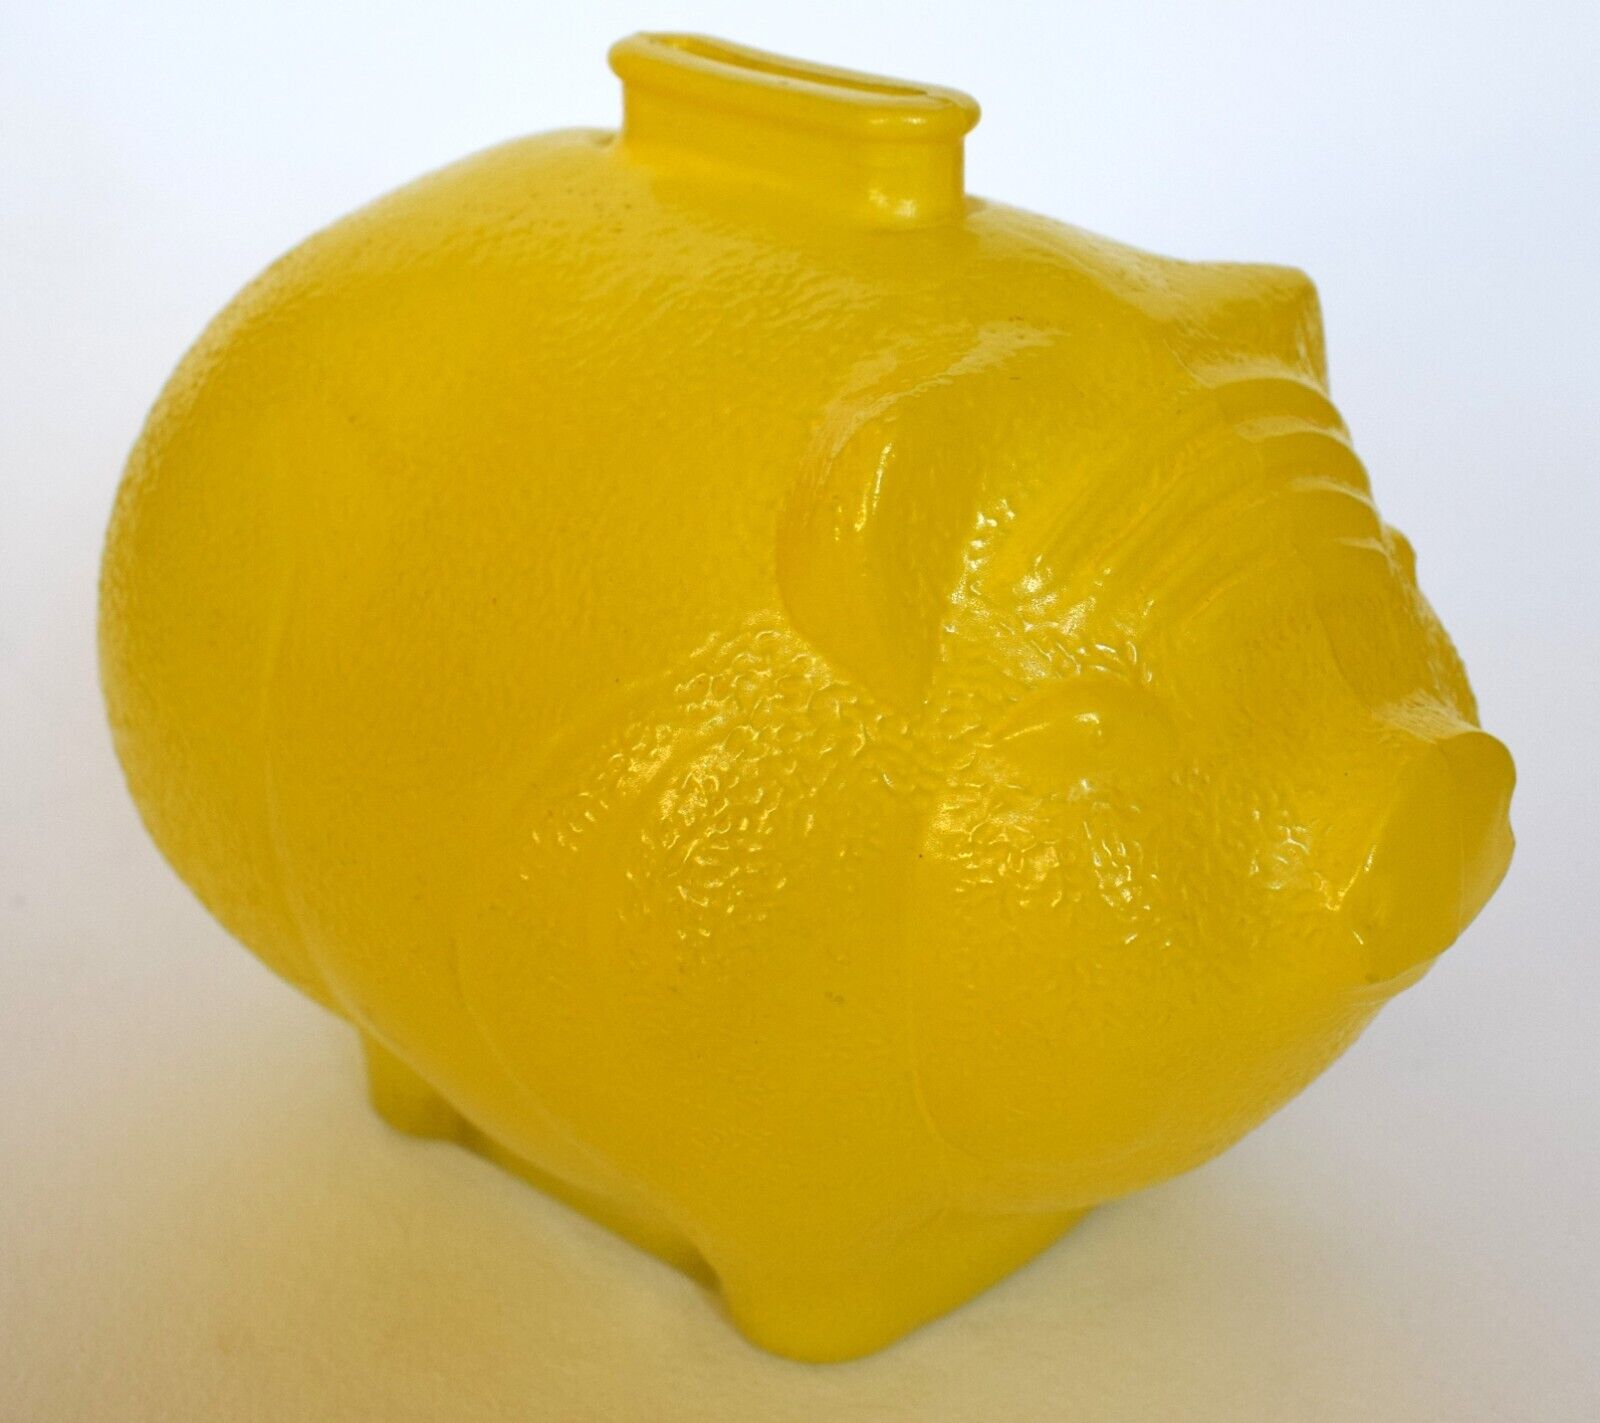 VINTAGE Anchor Hocking (large) glass pig bank (YELLOW) - Mint condition